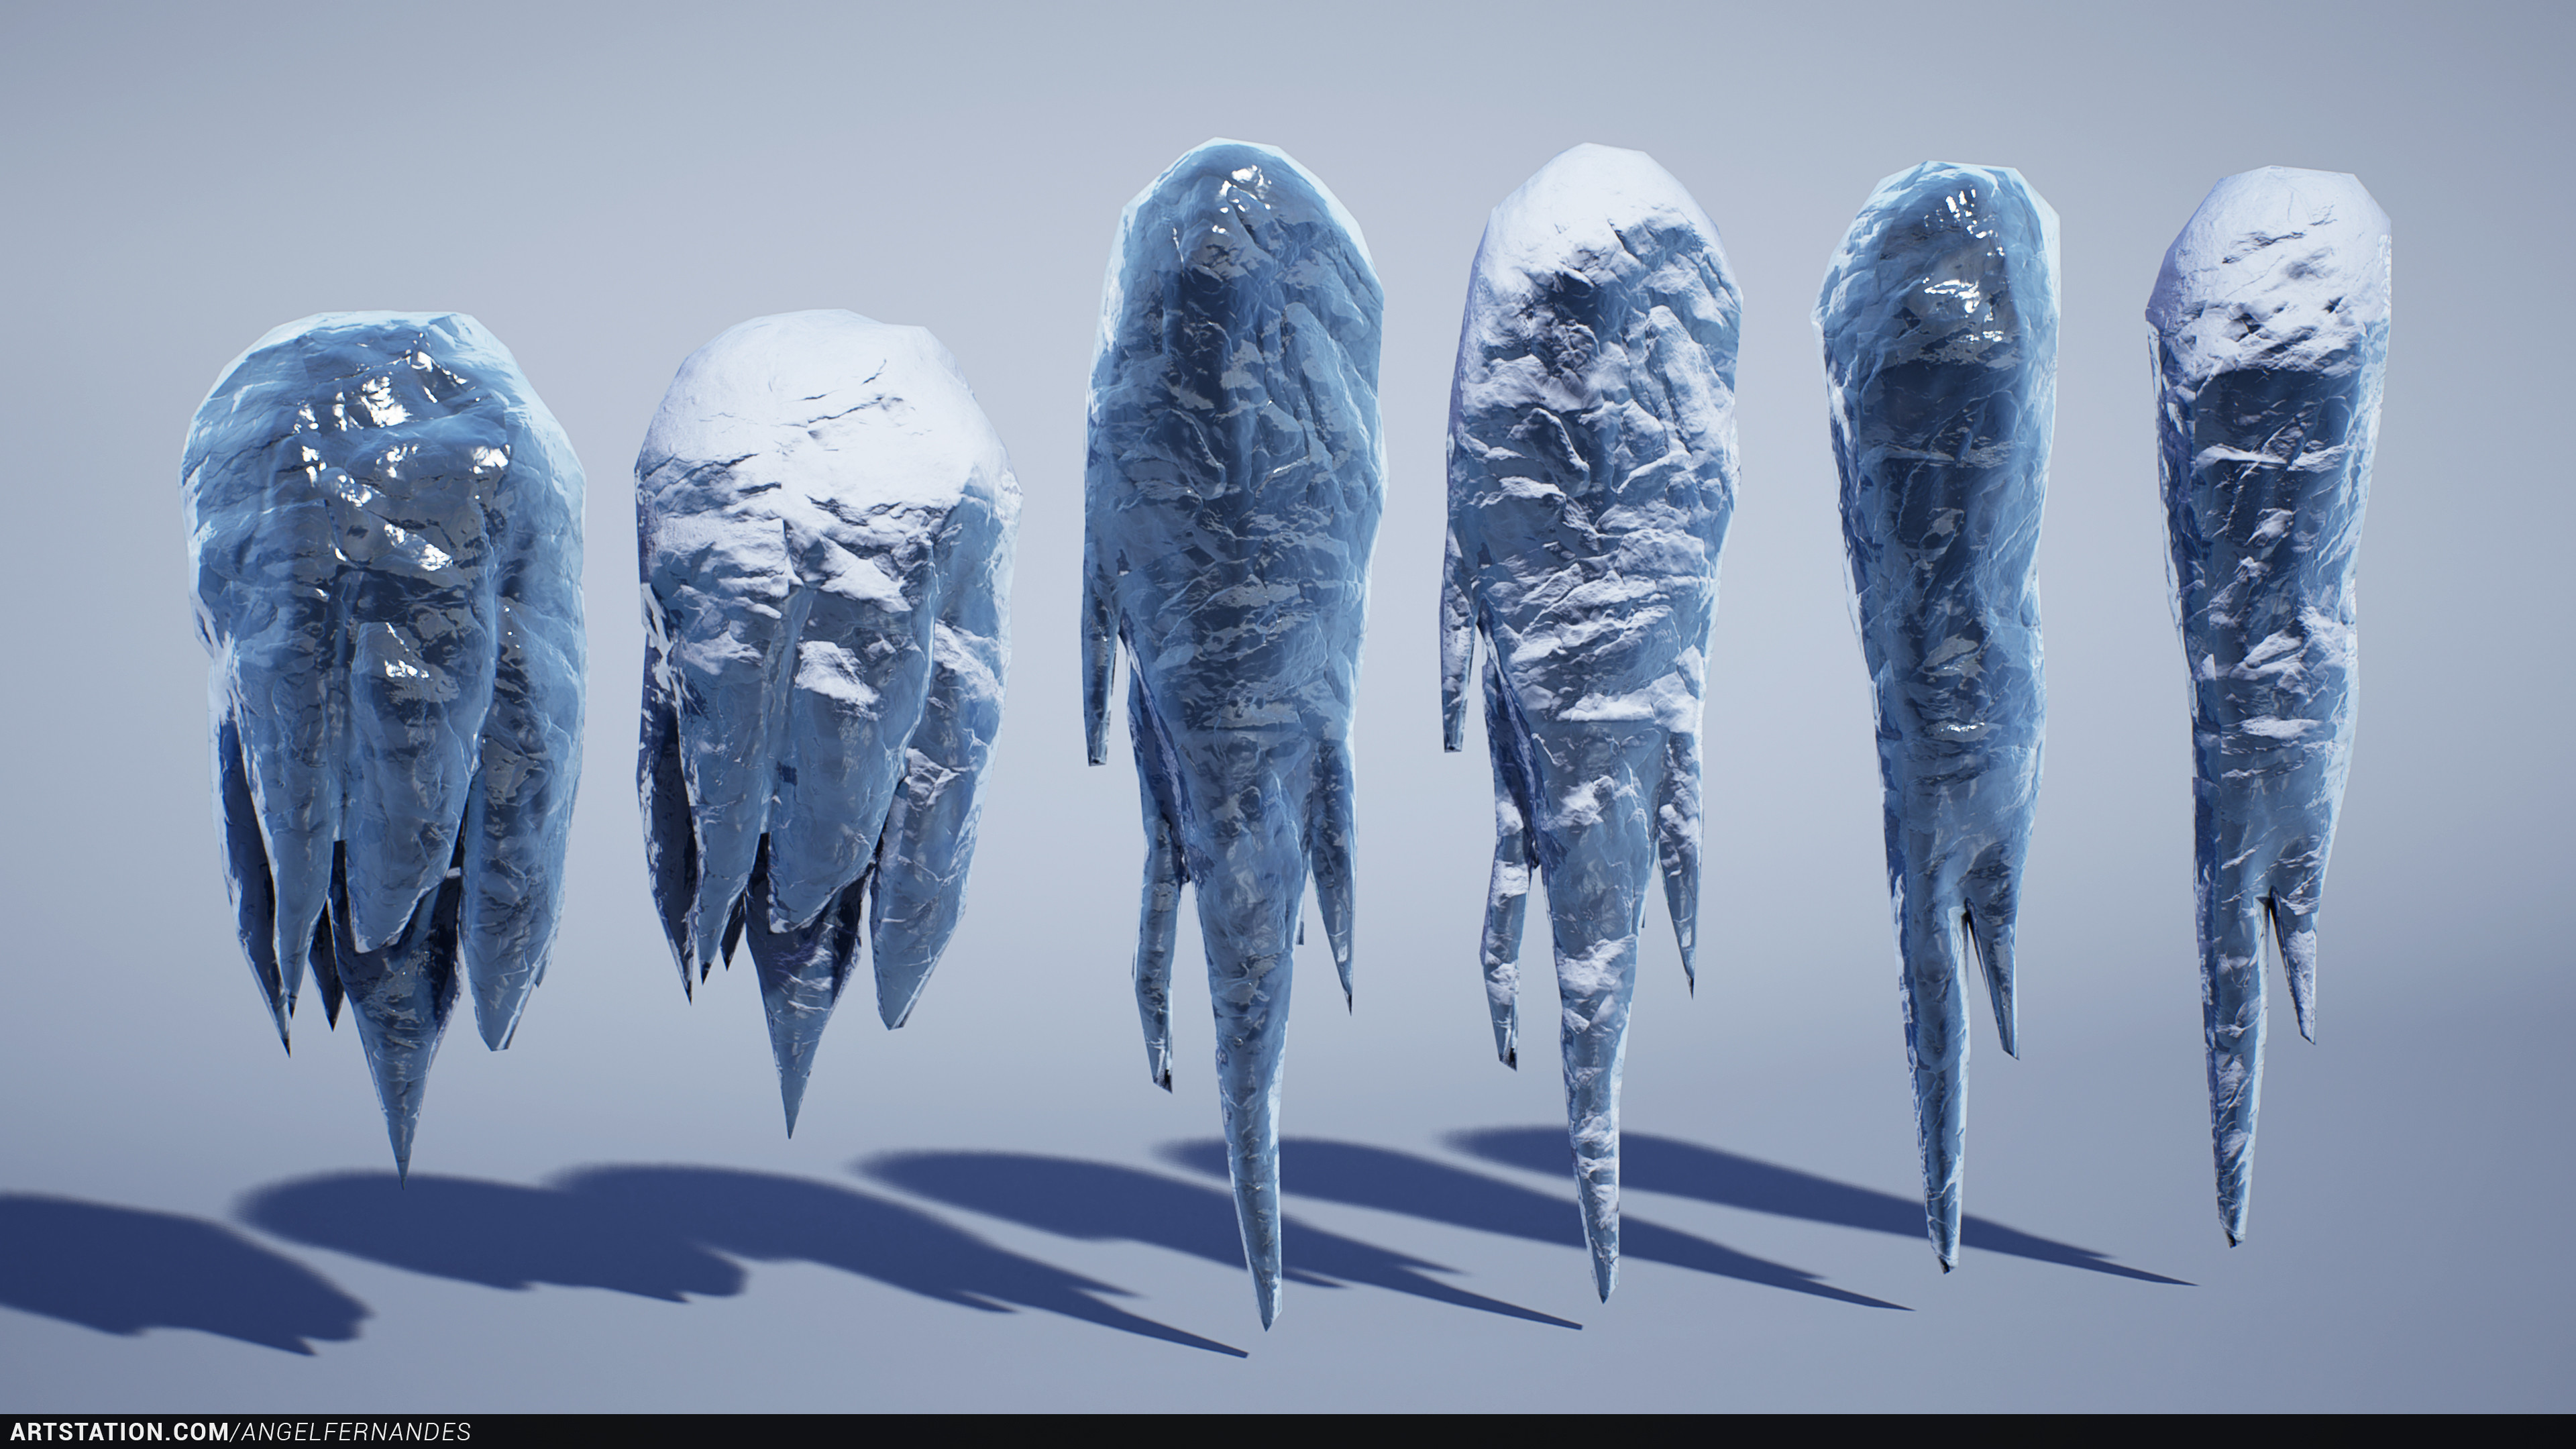 Some basic hanging snow/ice shapes... snow blending, normal detail, fuzzy shading, etc...